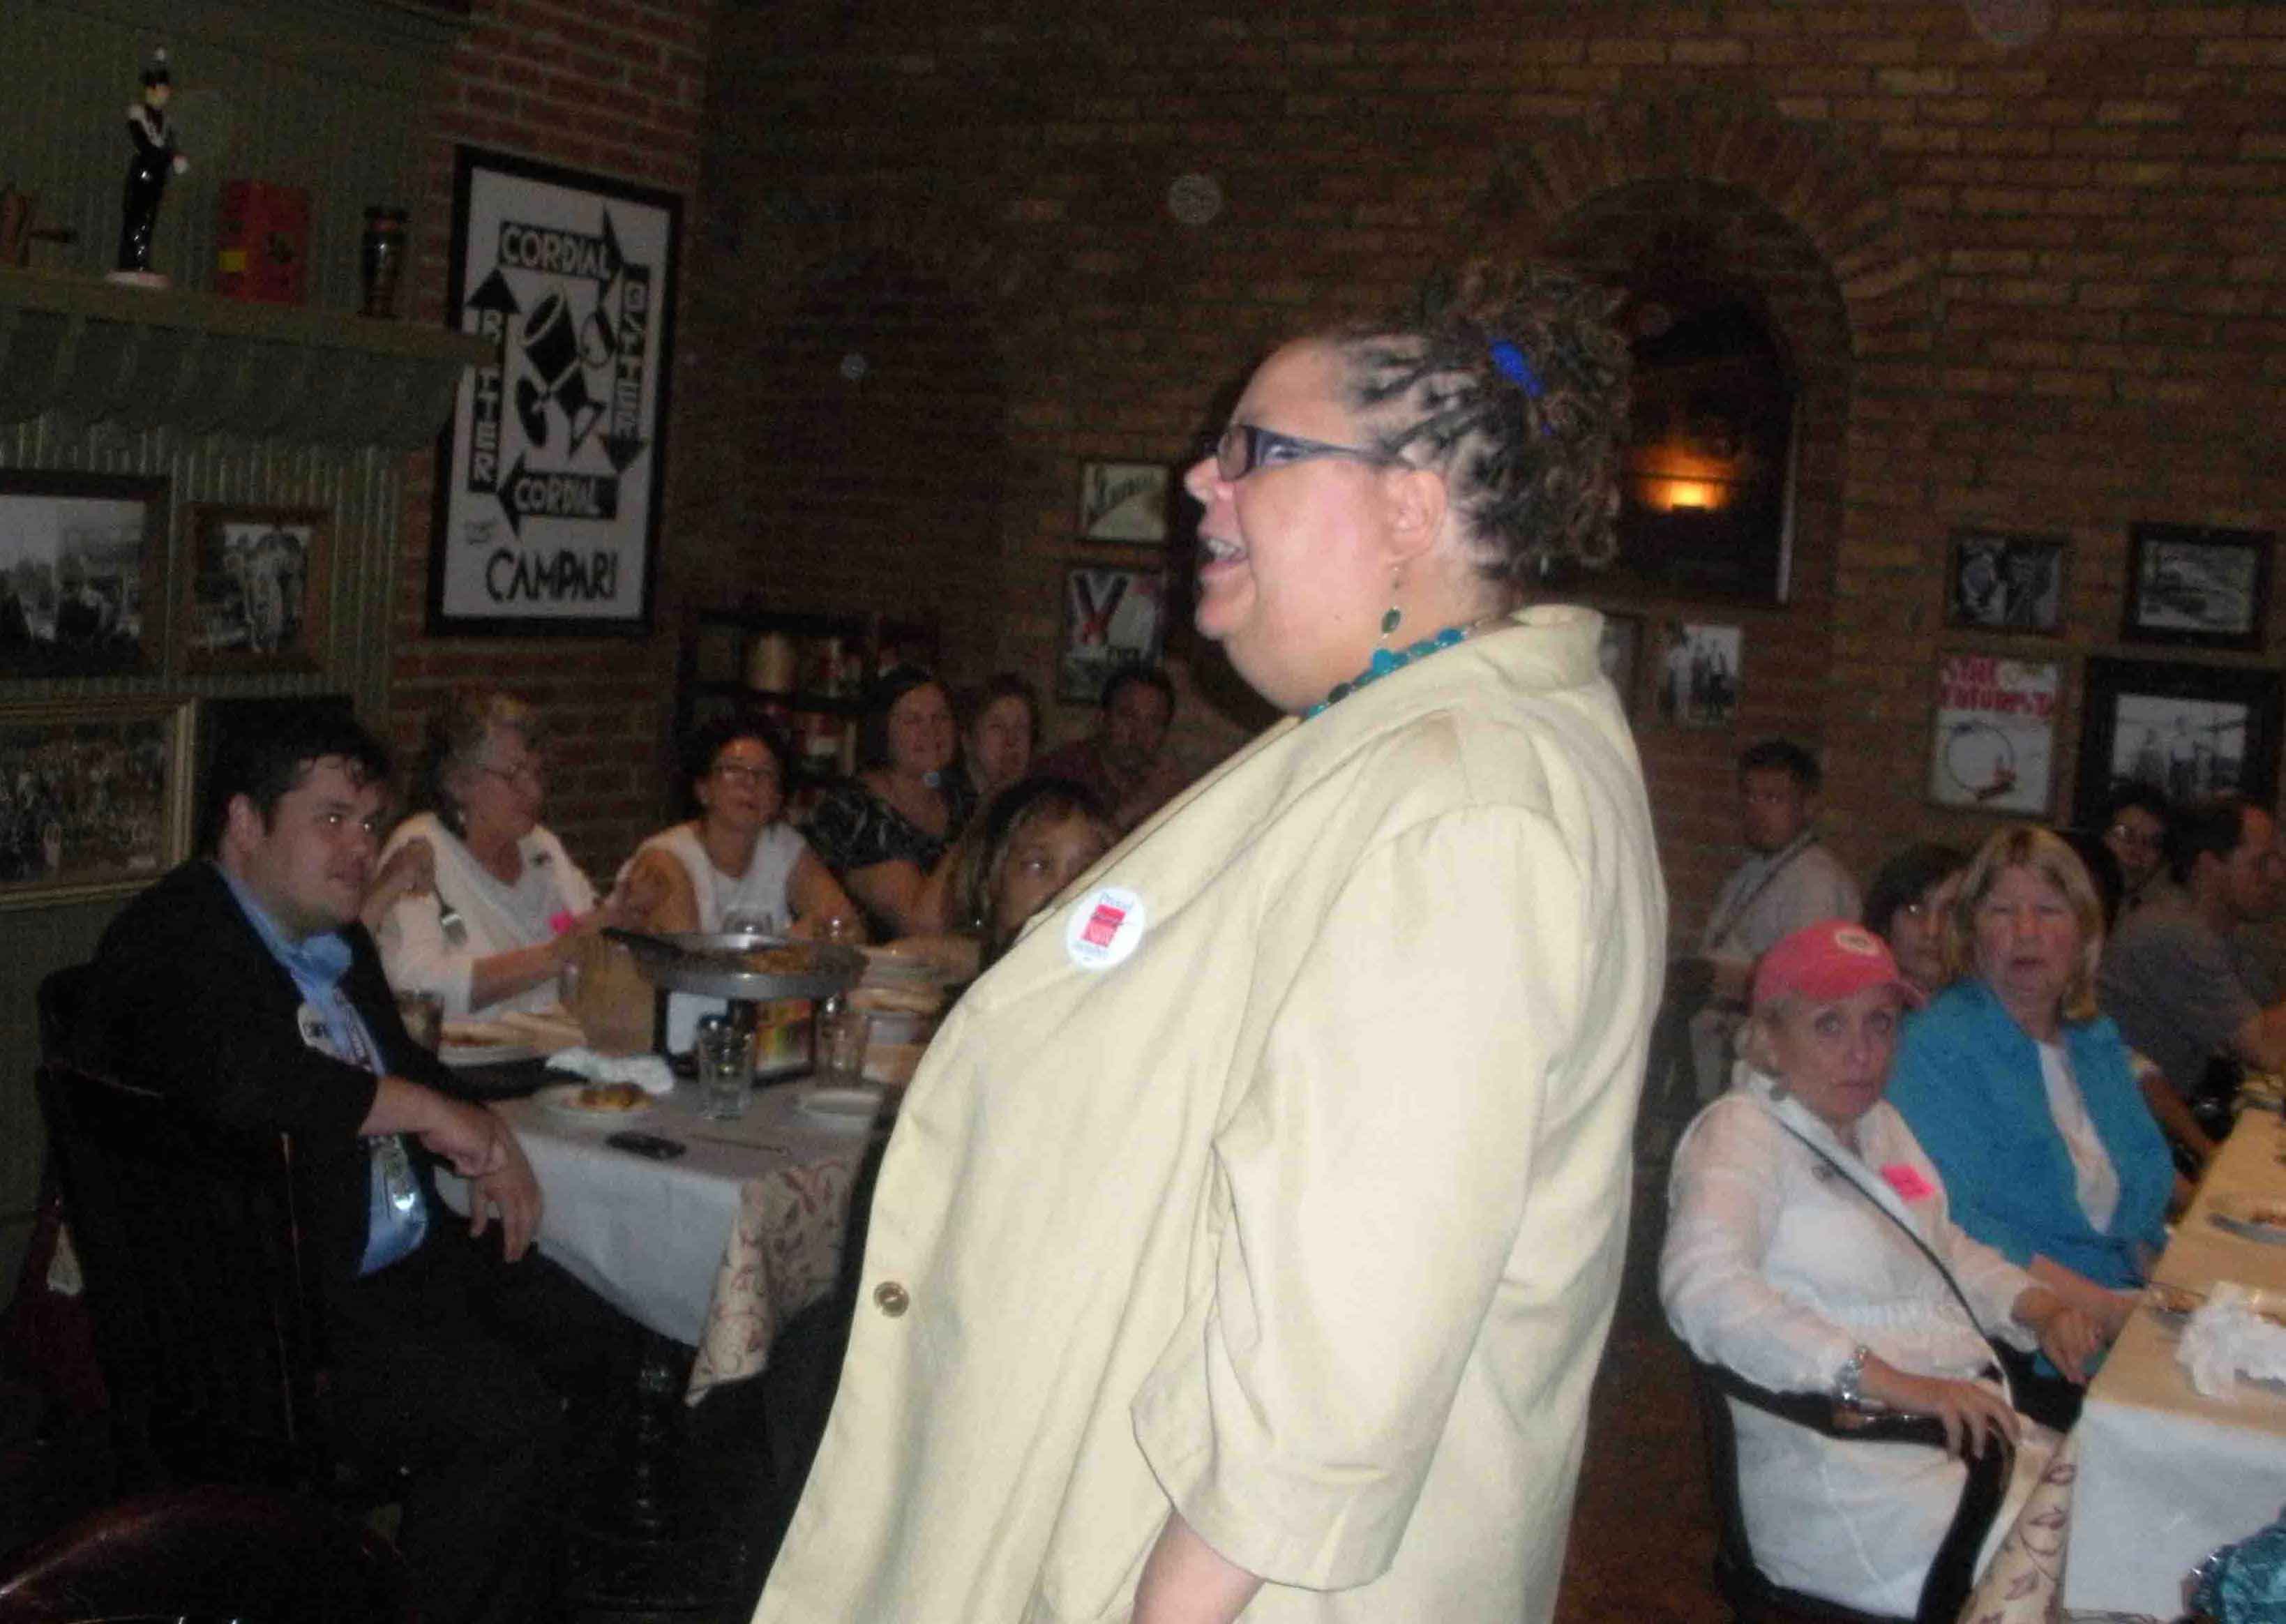 After campaigning on promises of a new era of transparency and accountability in union affairs, incoming Chicago Teachers Union President Karen Lewis (above, speaking to supporters at Connie's Pizza following the June CTU House of Delegates meeting and prior to the June 11 runoff election) surprised most of her supporters with the announcement of her transition team at the June 28 CORE meeting. Substance photo by John Kugler.